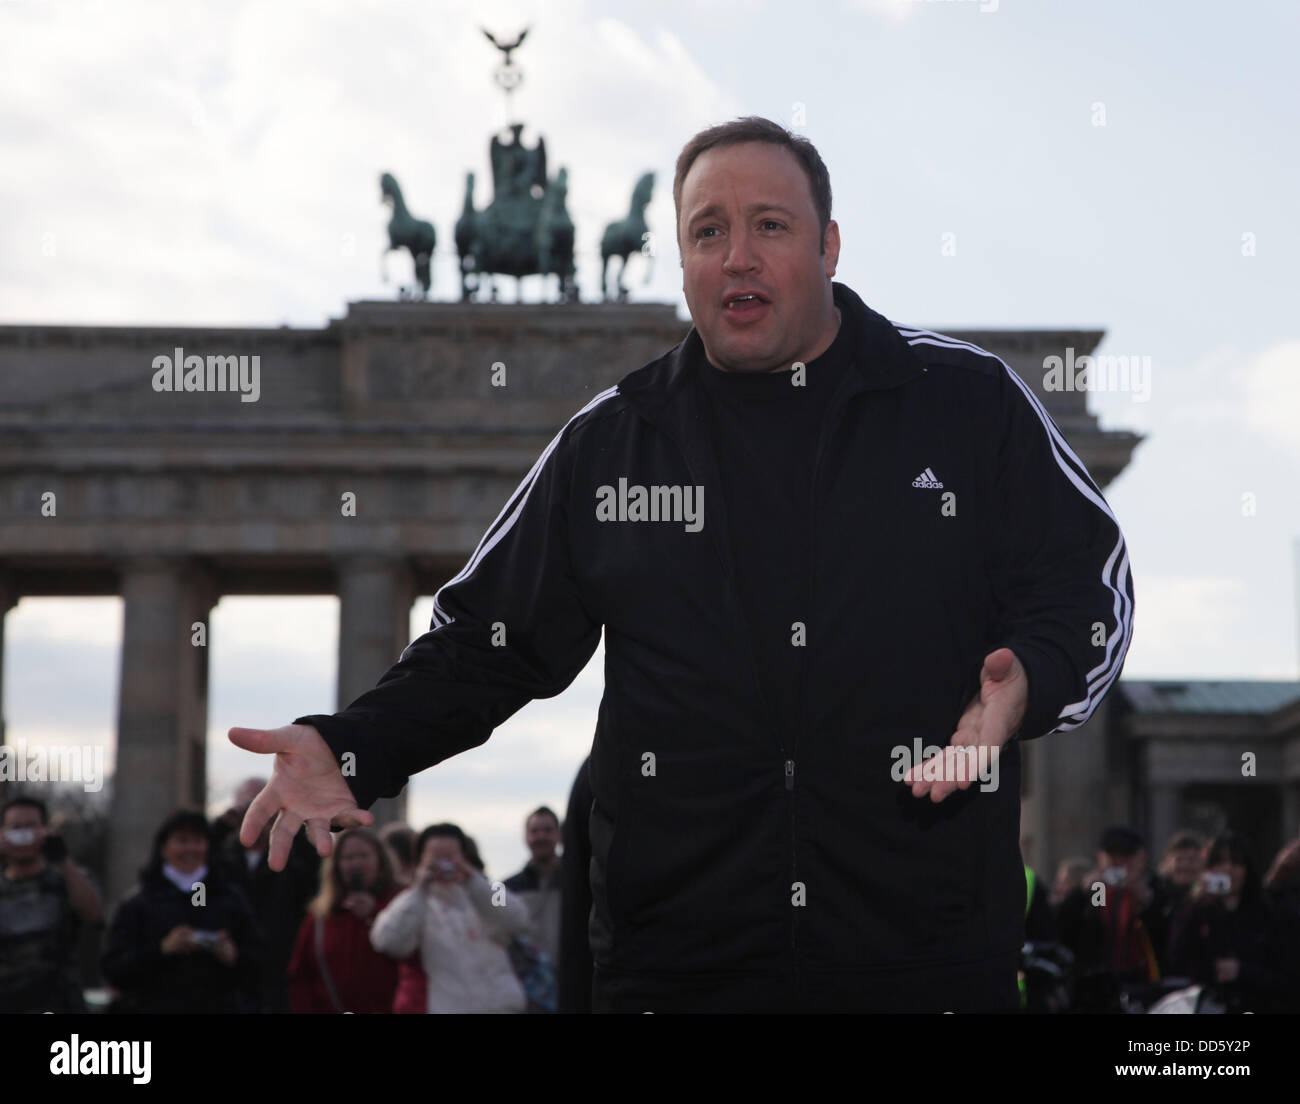 US actor Kevin James in front of Brandenburg Gate. He is on promotion tour for his new film 'Paul Blart: Mall Cop'. Stock Photo